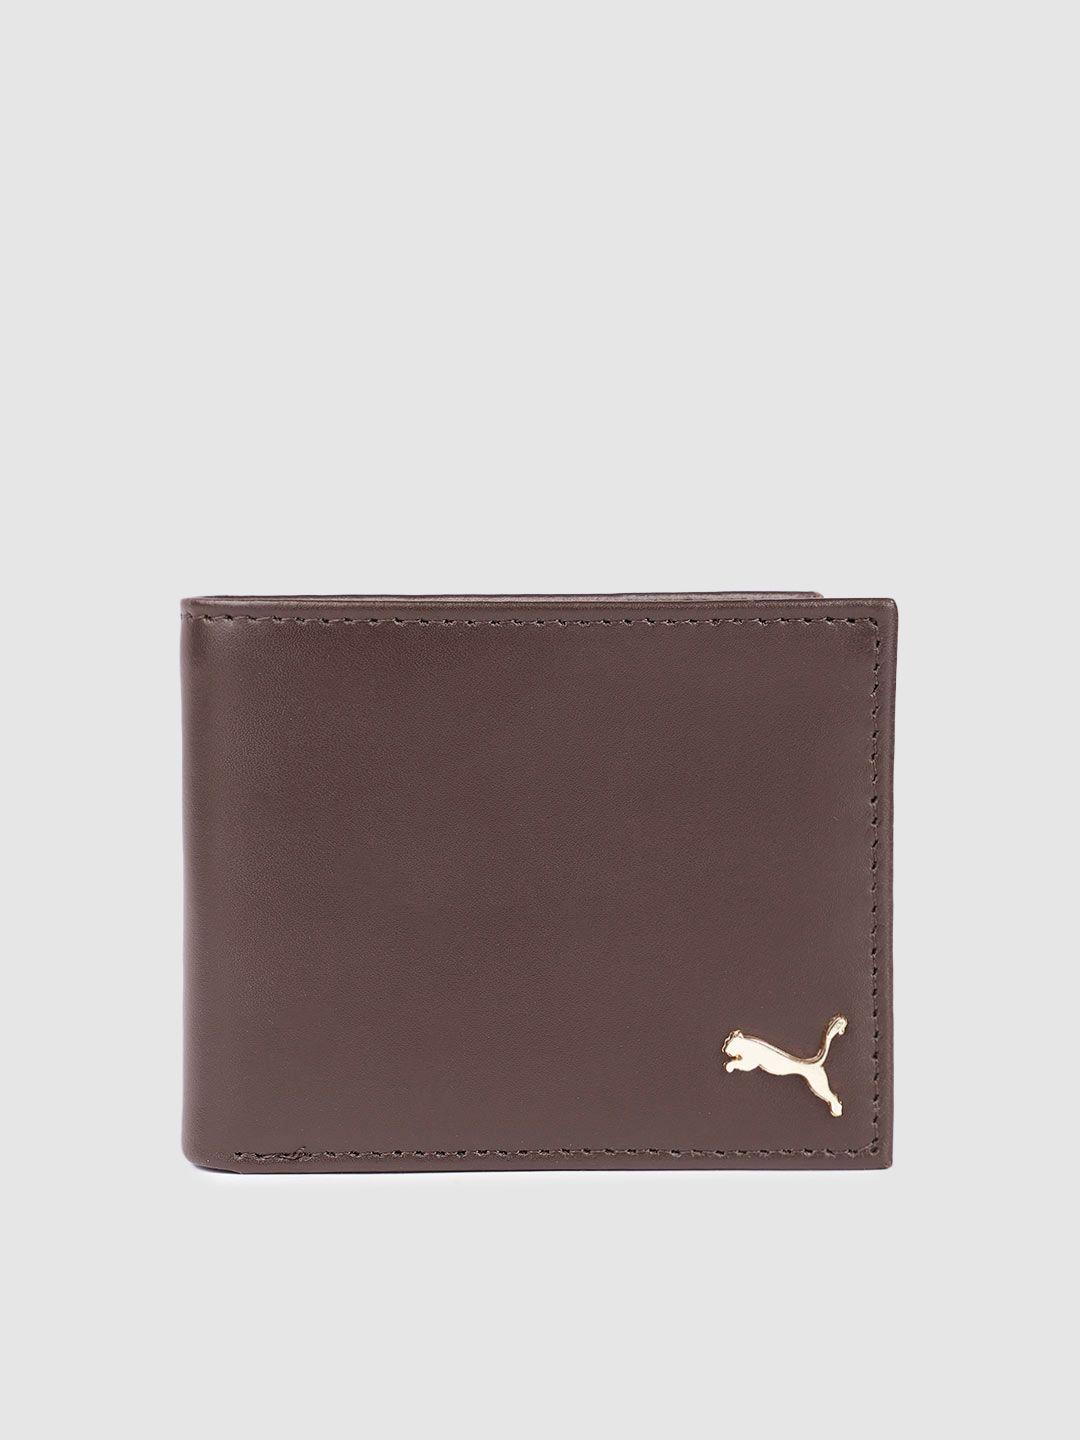 puma unisex brown leather two fold wallet